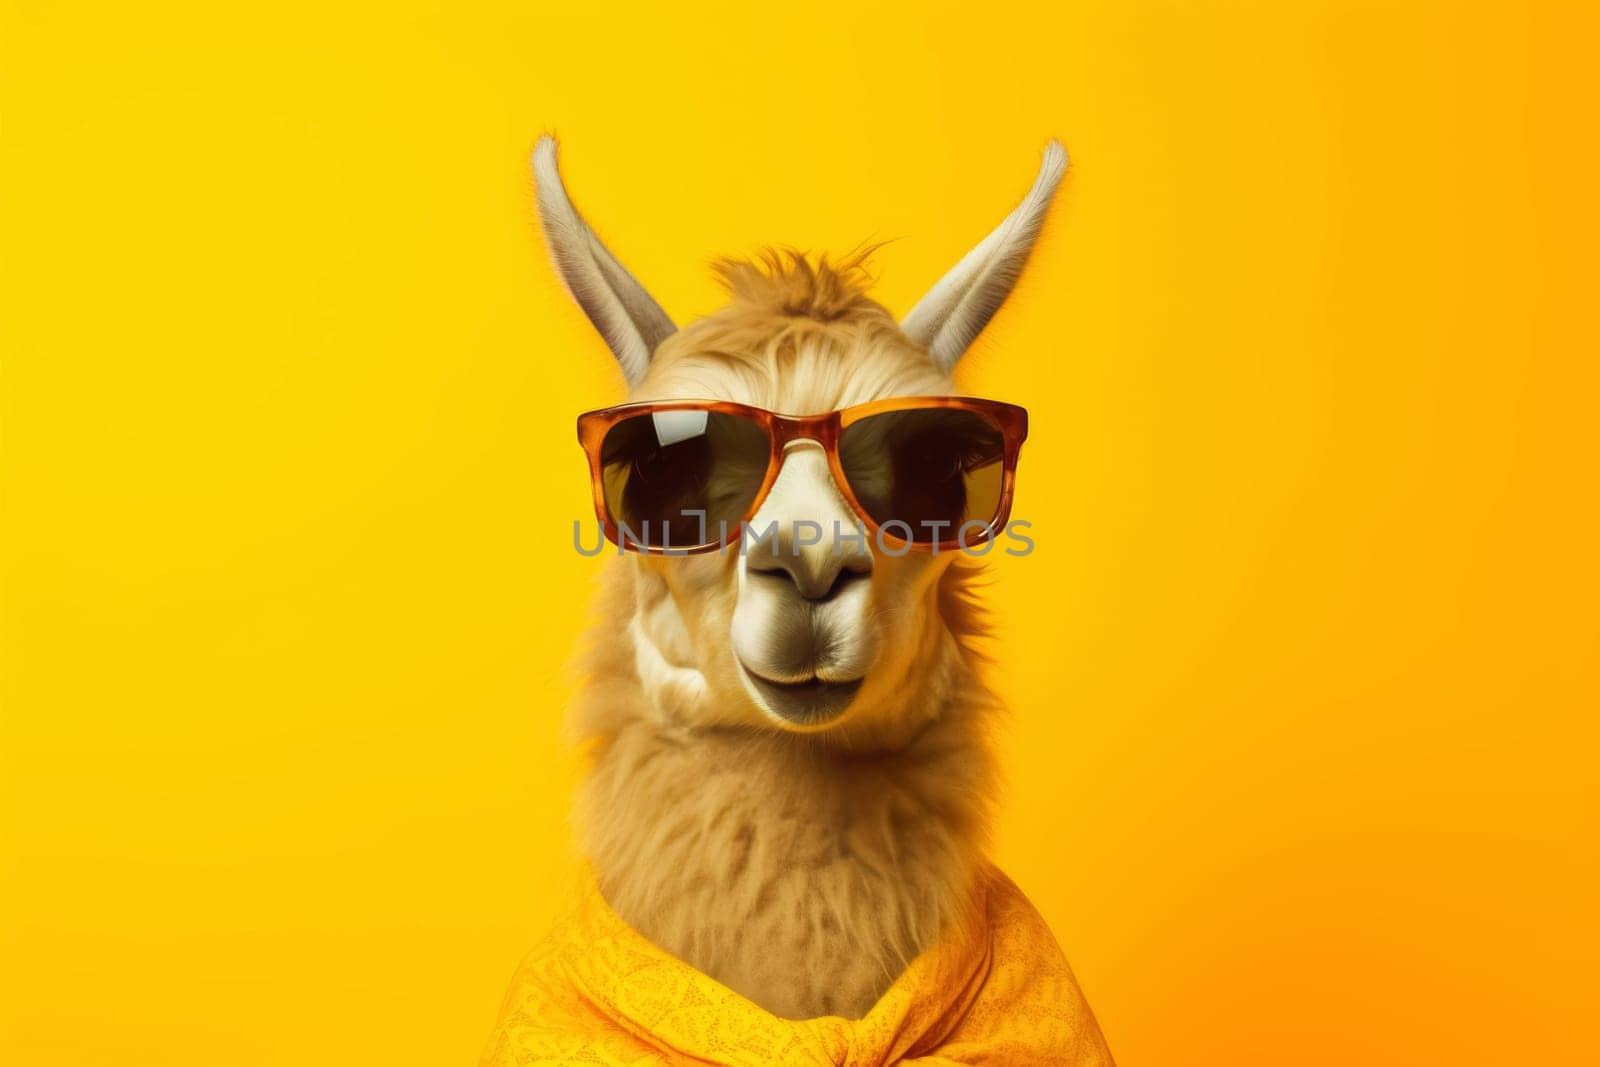 Cool Llama with Sunglasses by andreyz